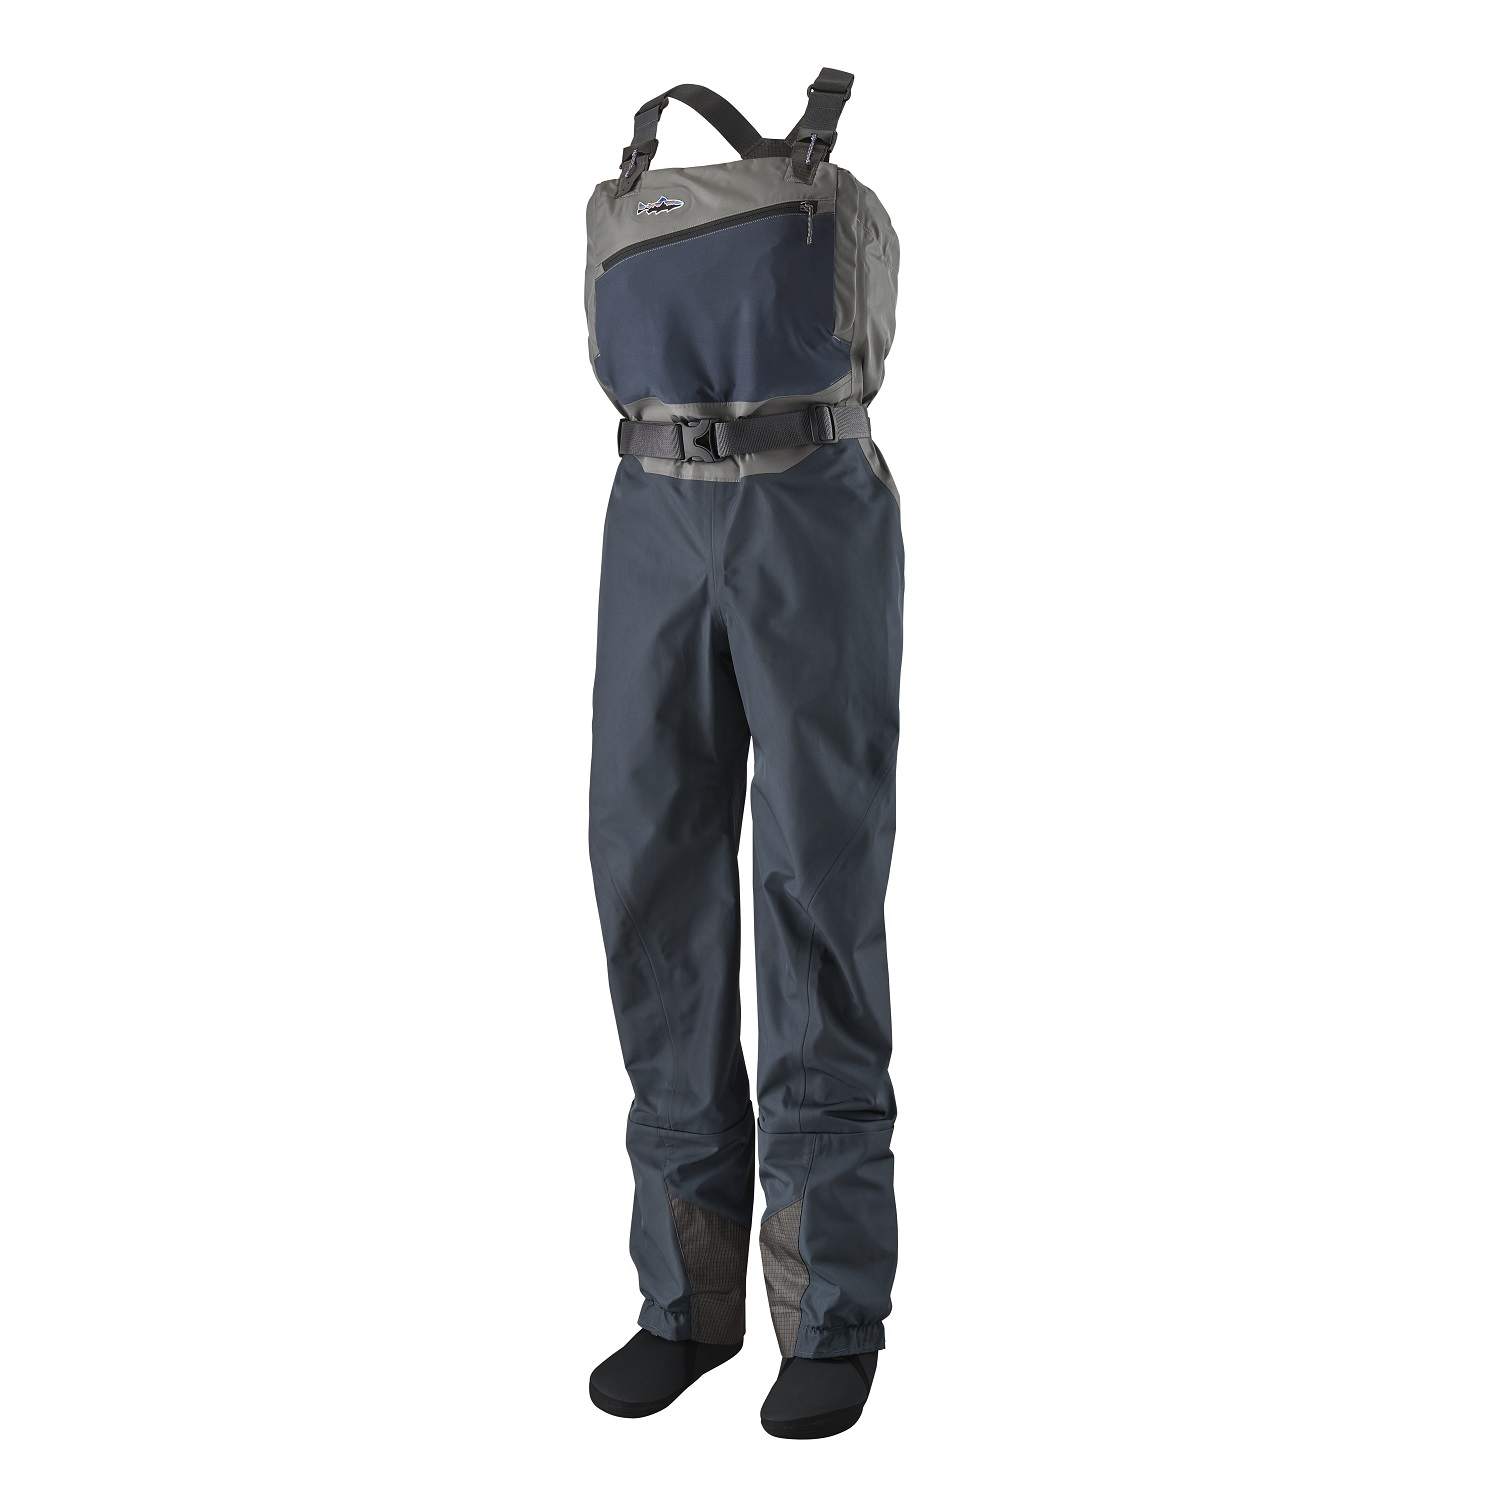 Fly Fishing Waders - get the best quality ▻buy at Rudi Heger